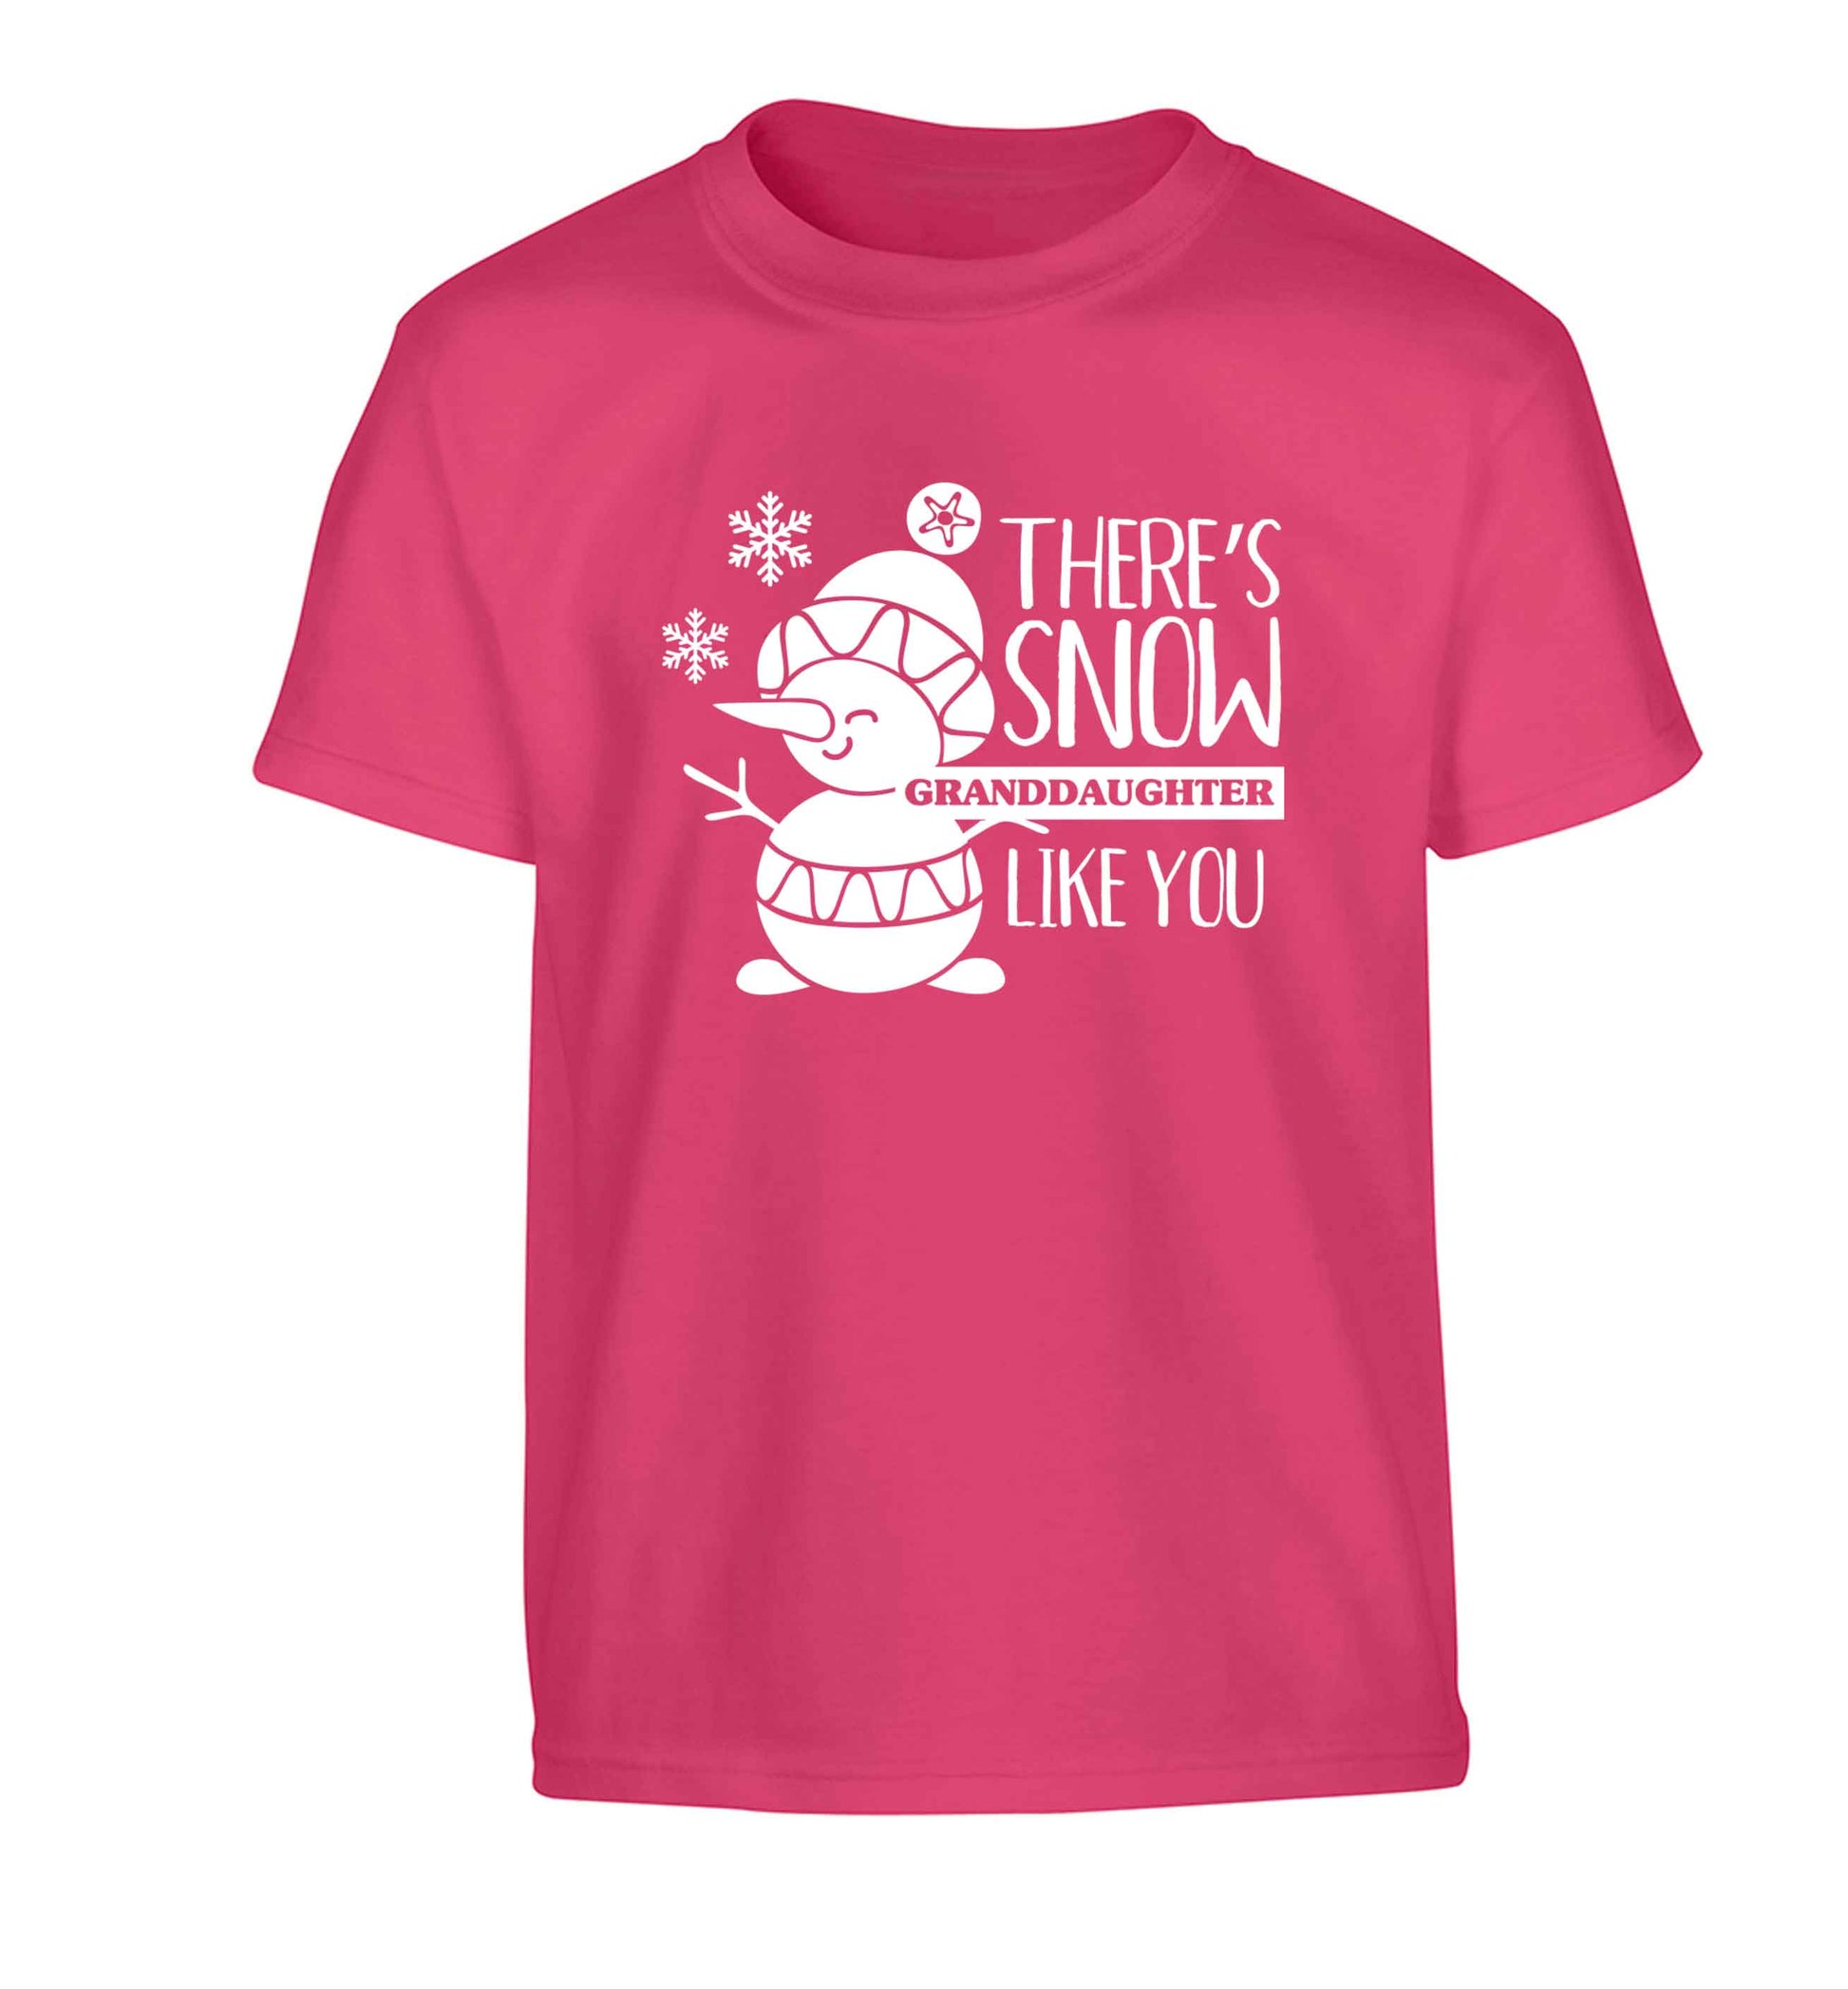 There's snow granddaughter like you Children's pink Tshirt 12-13 Years